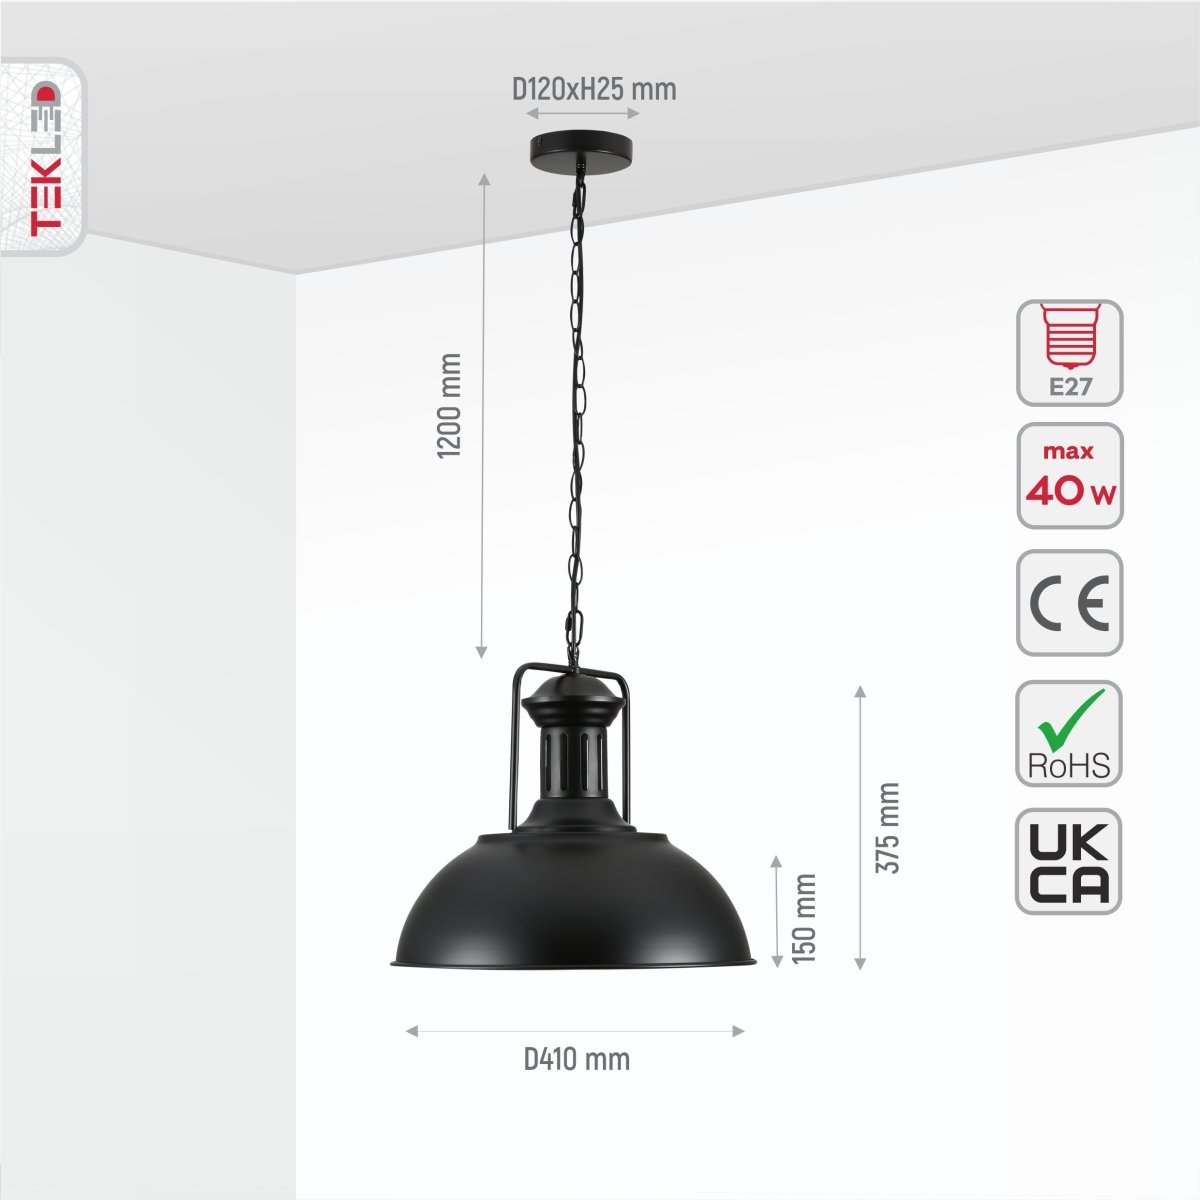 Size and specs of Black Dome Industrial Jumbo Metal Ceiling Pendant Light with E27 Fitting | TEKLED 150-18356